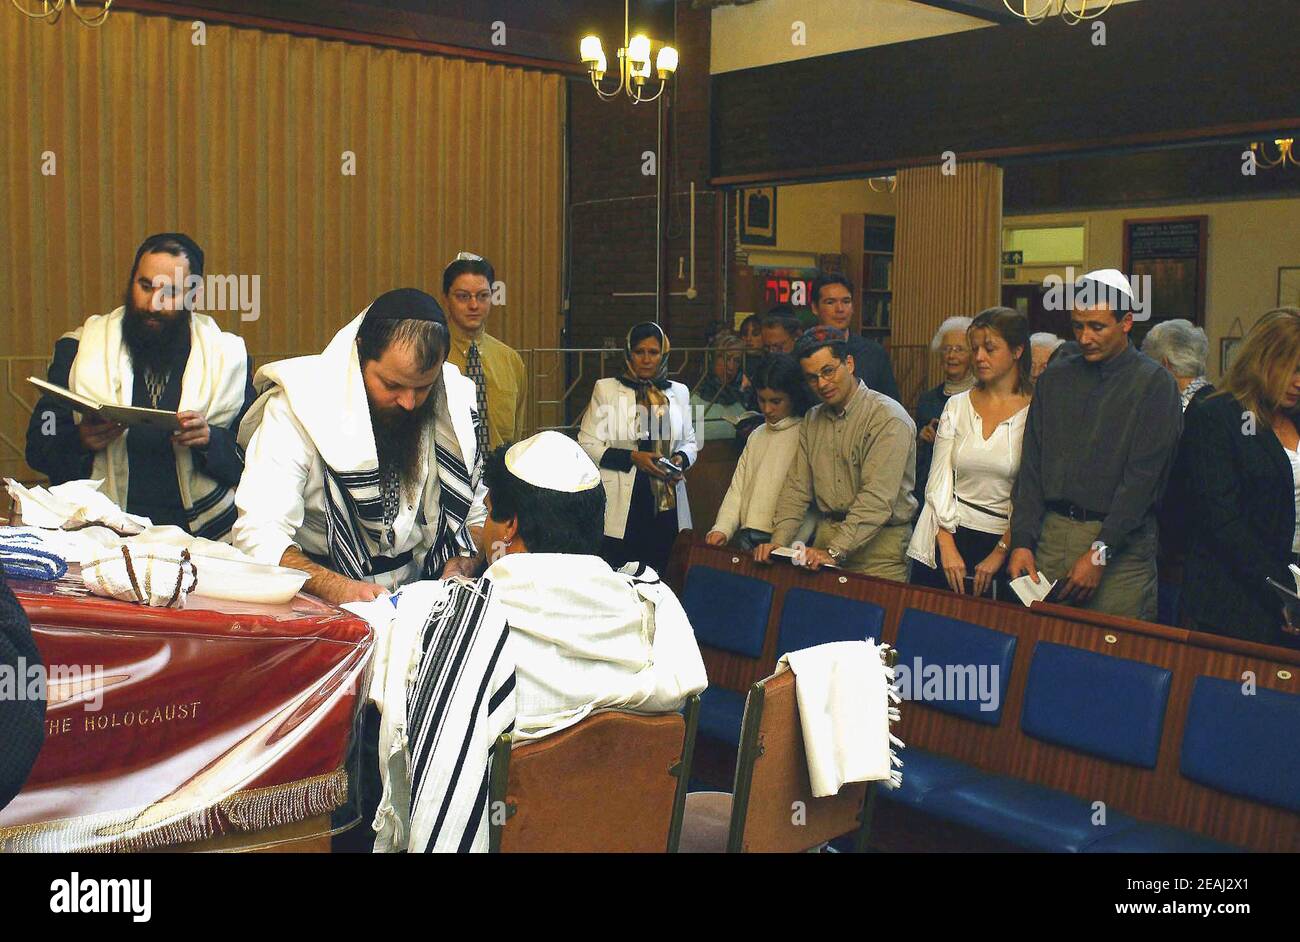 A Brit Milah ceremony takes place on the bimah of the synagogue in the Solihull, West Midlands, as the Mohel gives the traditional blessings as he commences the circumcision watched by the rabbi and family members. Stock Photo